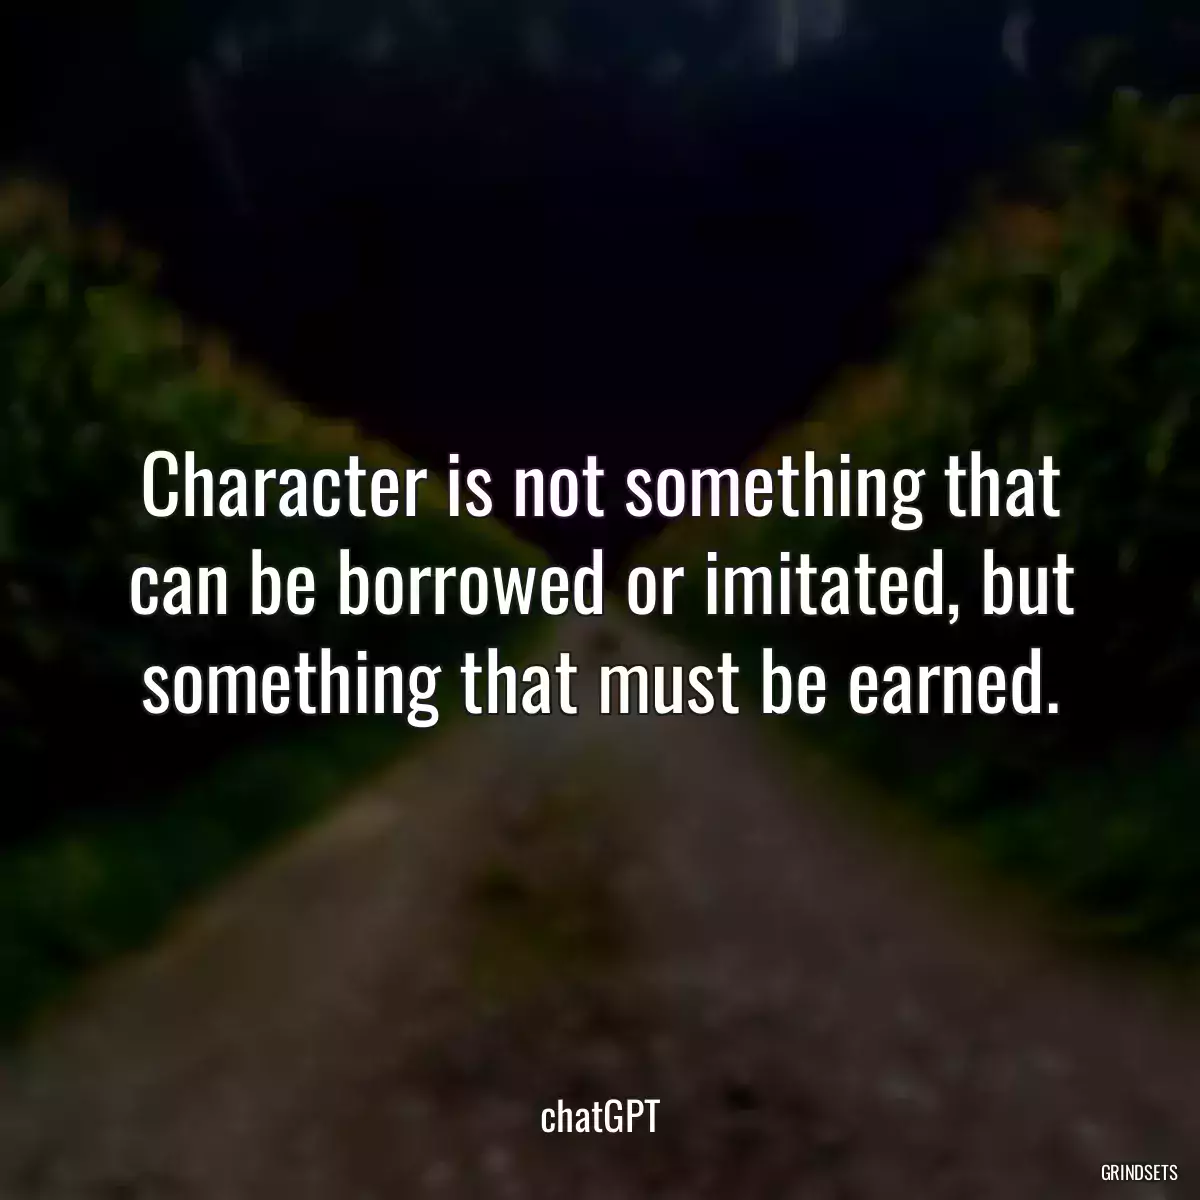 Character is not something that can be borrowed or imitated, but something that must be earned.